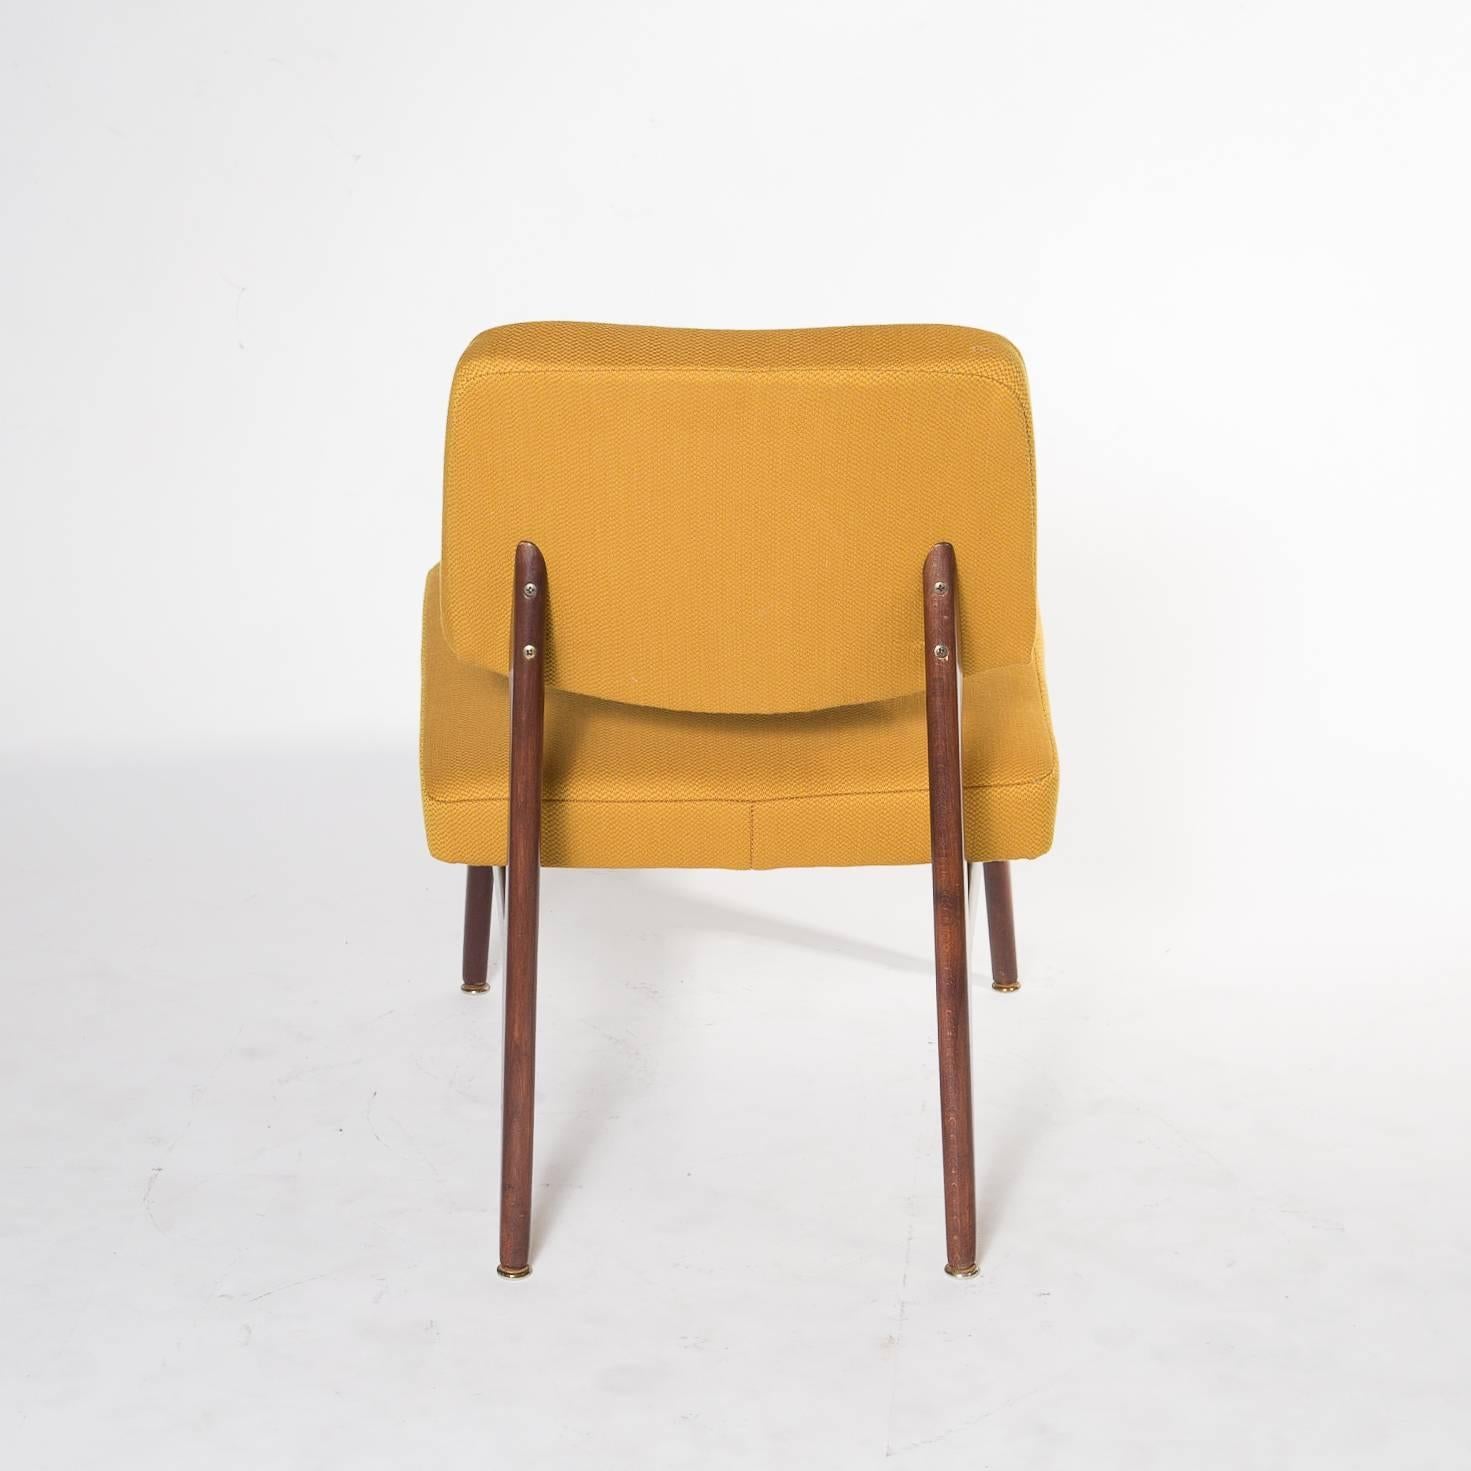 Mid-Century Modern 3 Thonet No. 681 Mid-Century Design Chairs Designed 1958 by Eberle, Germany 1965 For Sale